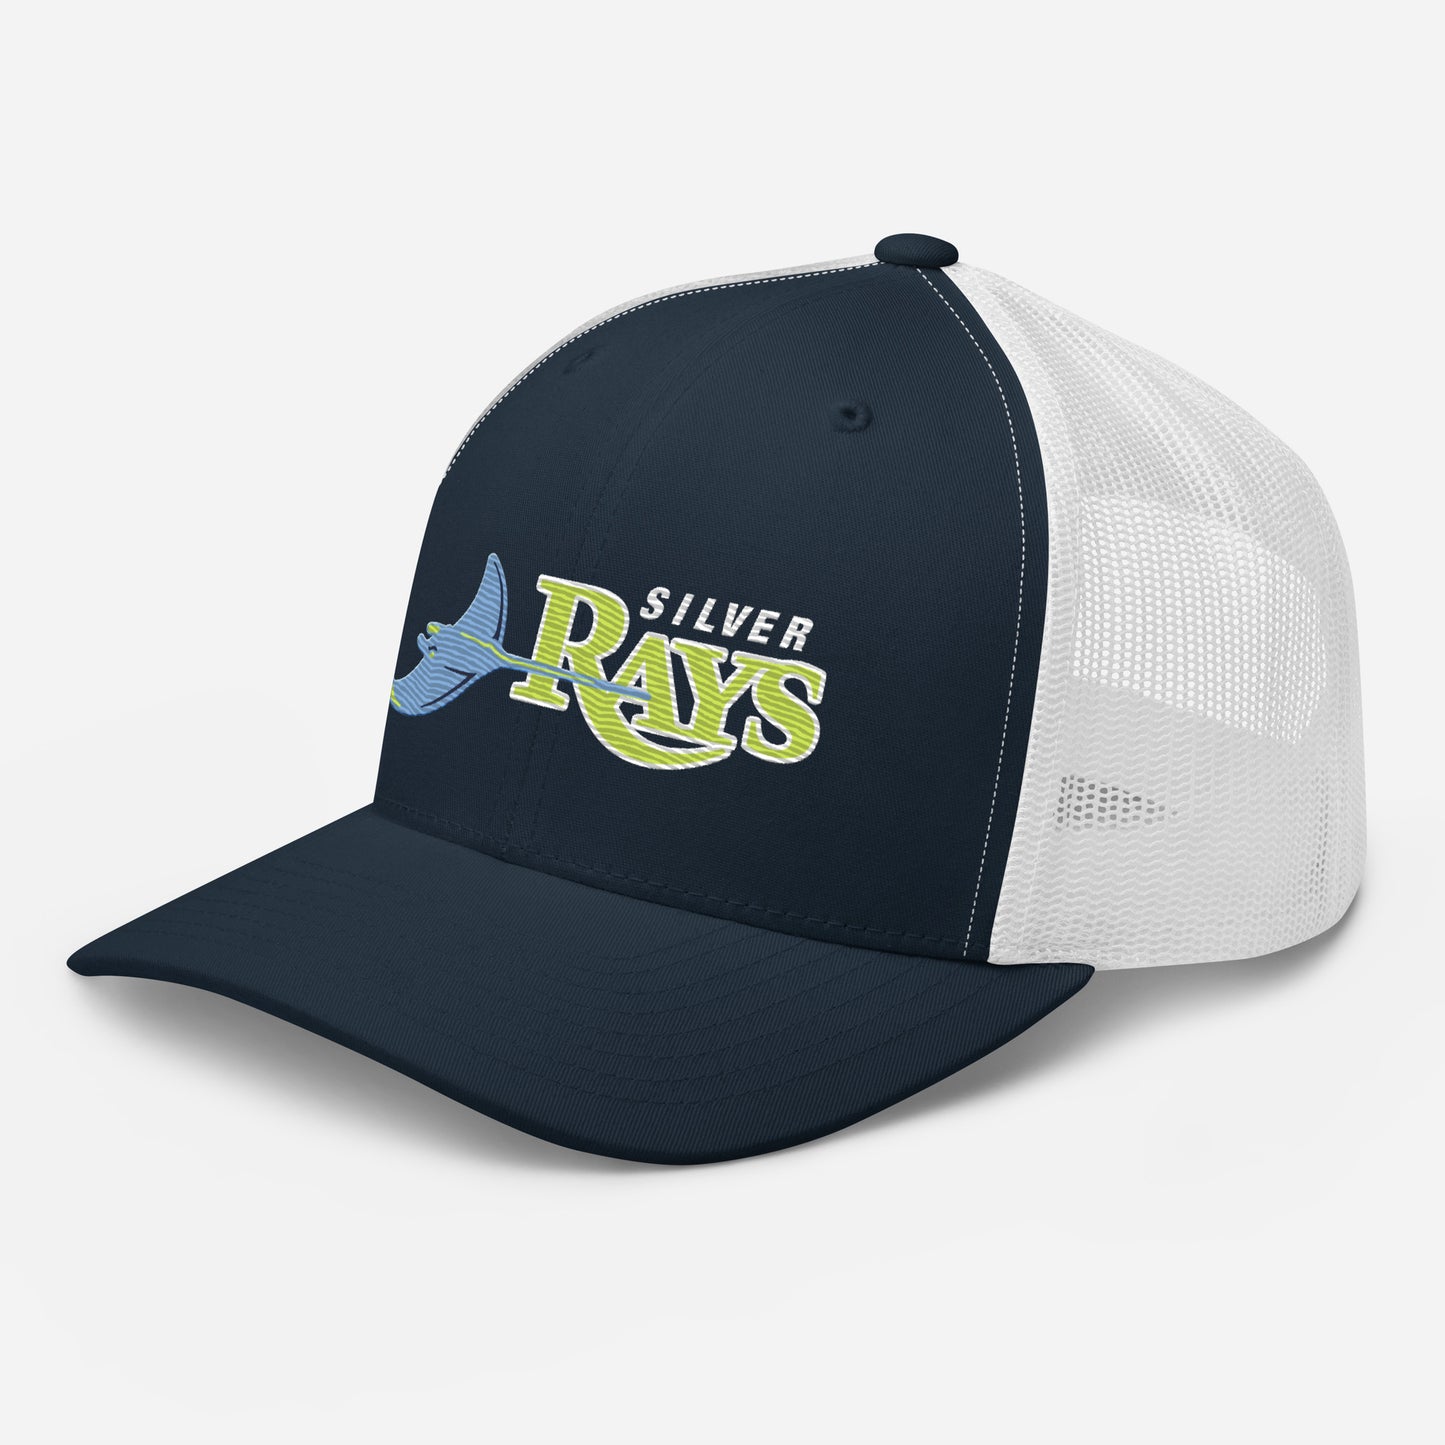 Navy and White Trucker Cap with Bright Yellow and Light blue Silver Rays Logo